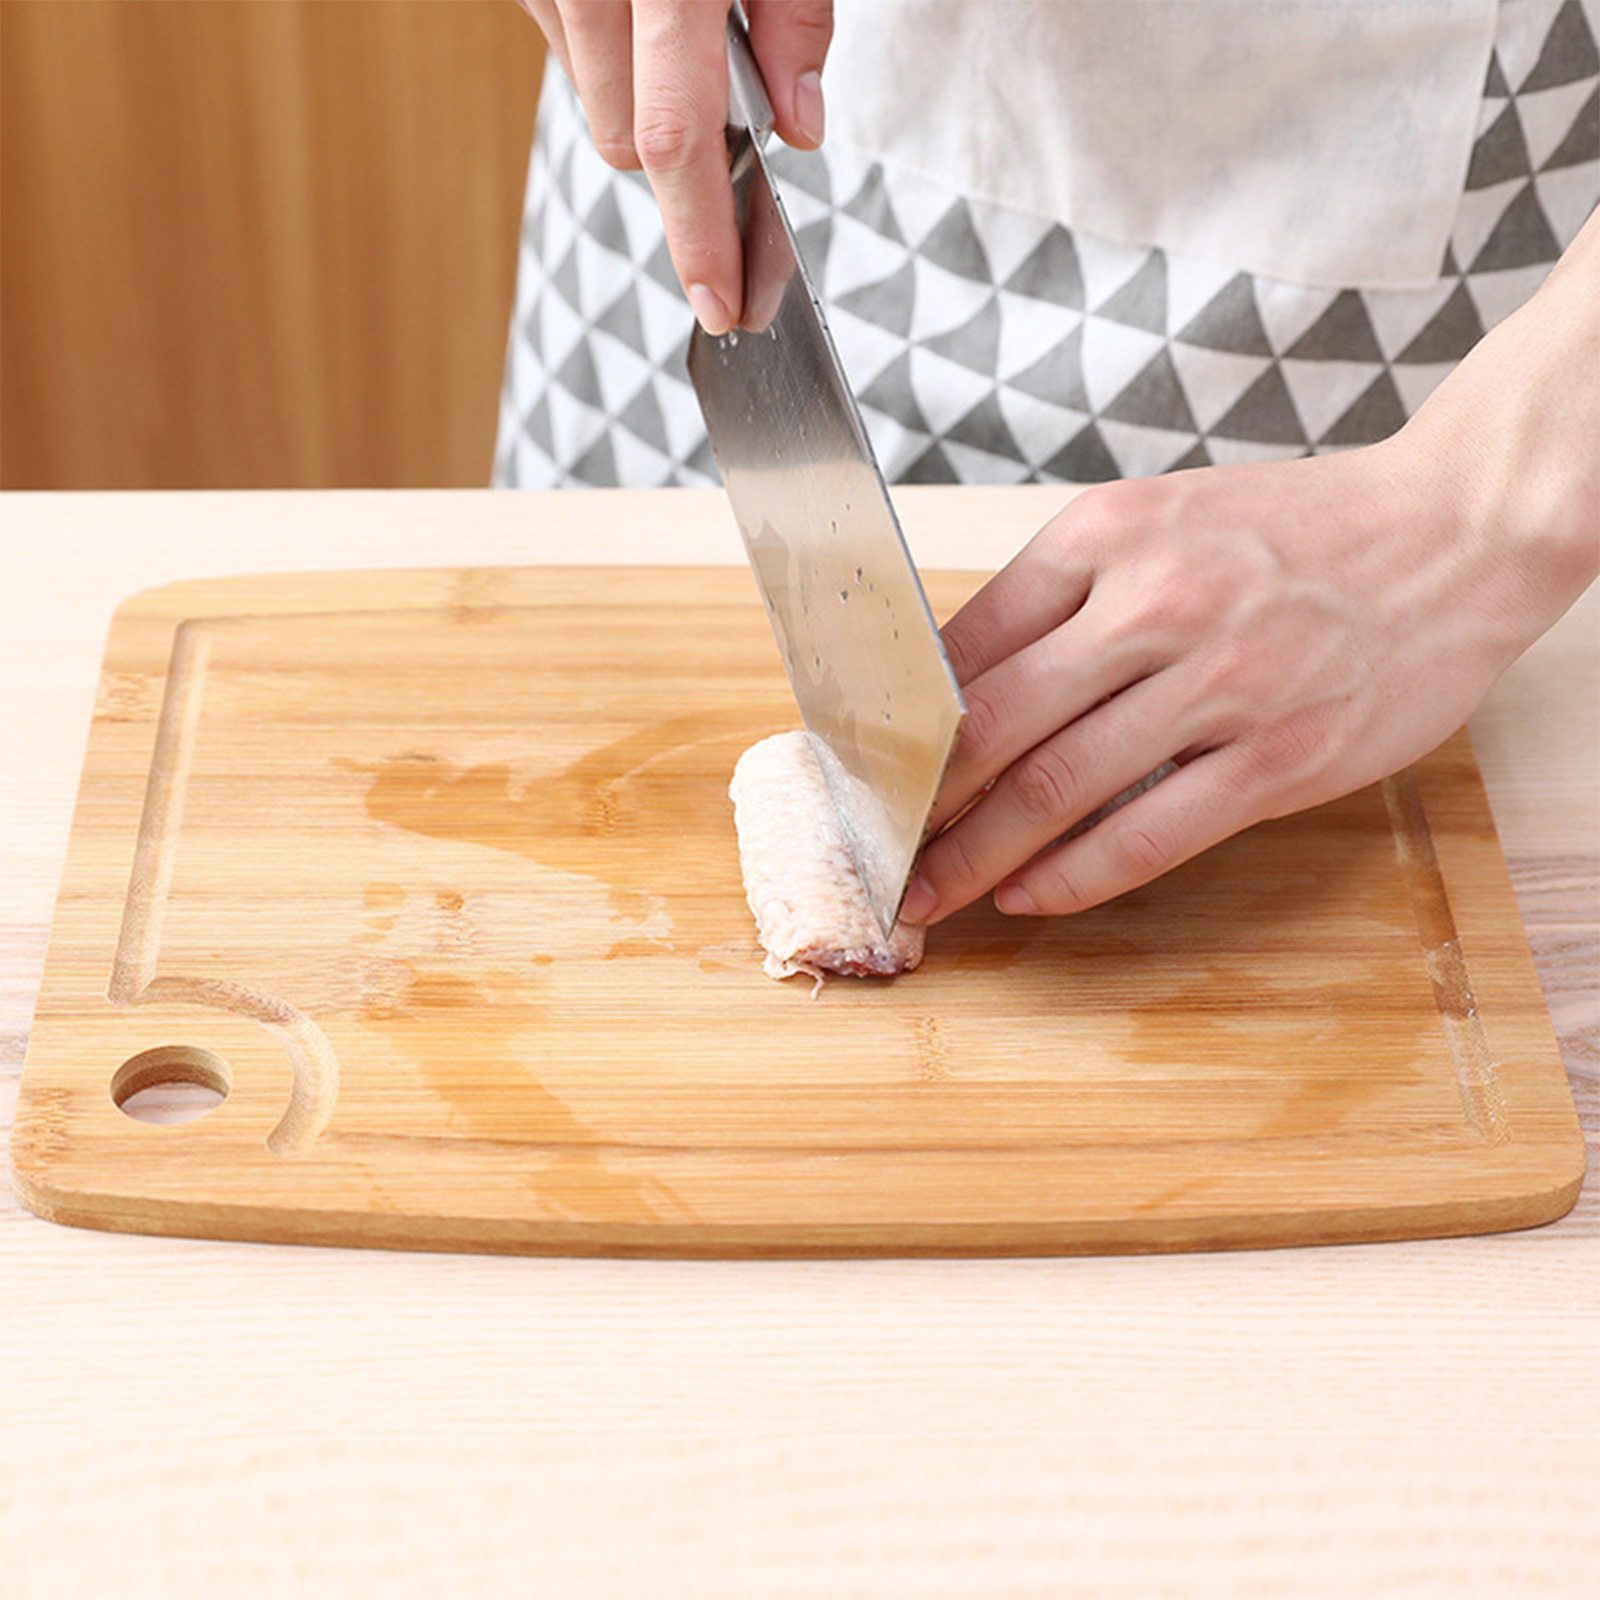 Chopping Block, Healthy and Environmentally Friendly Bamboo Cutting Board with Hanging Hole for Meat Cheese Fruit Vegetables